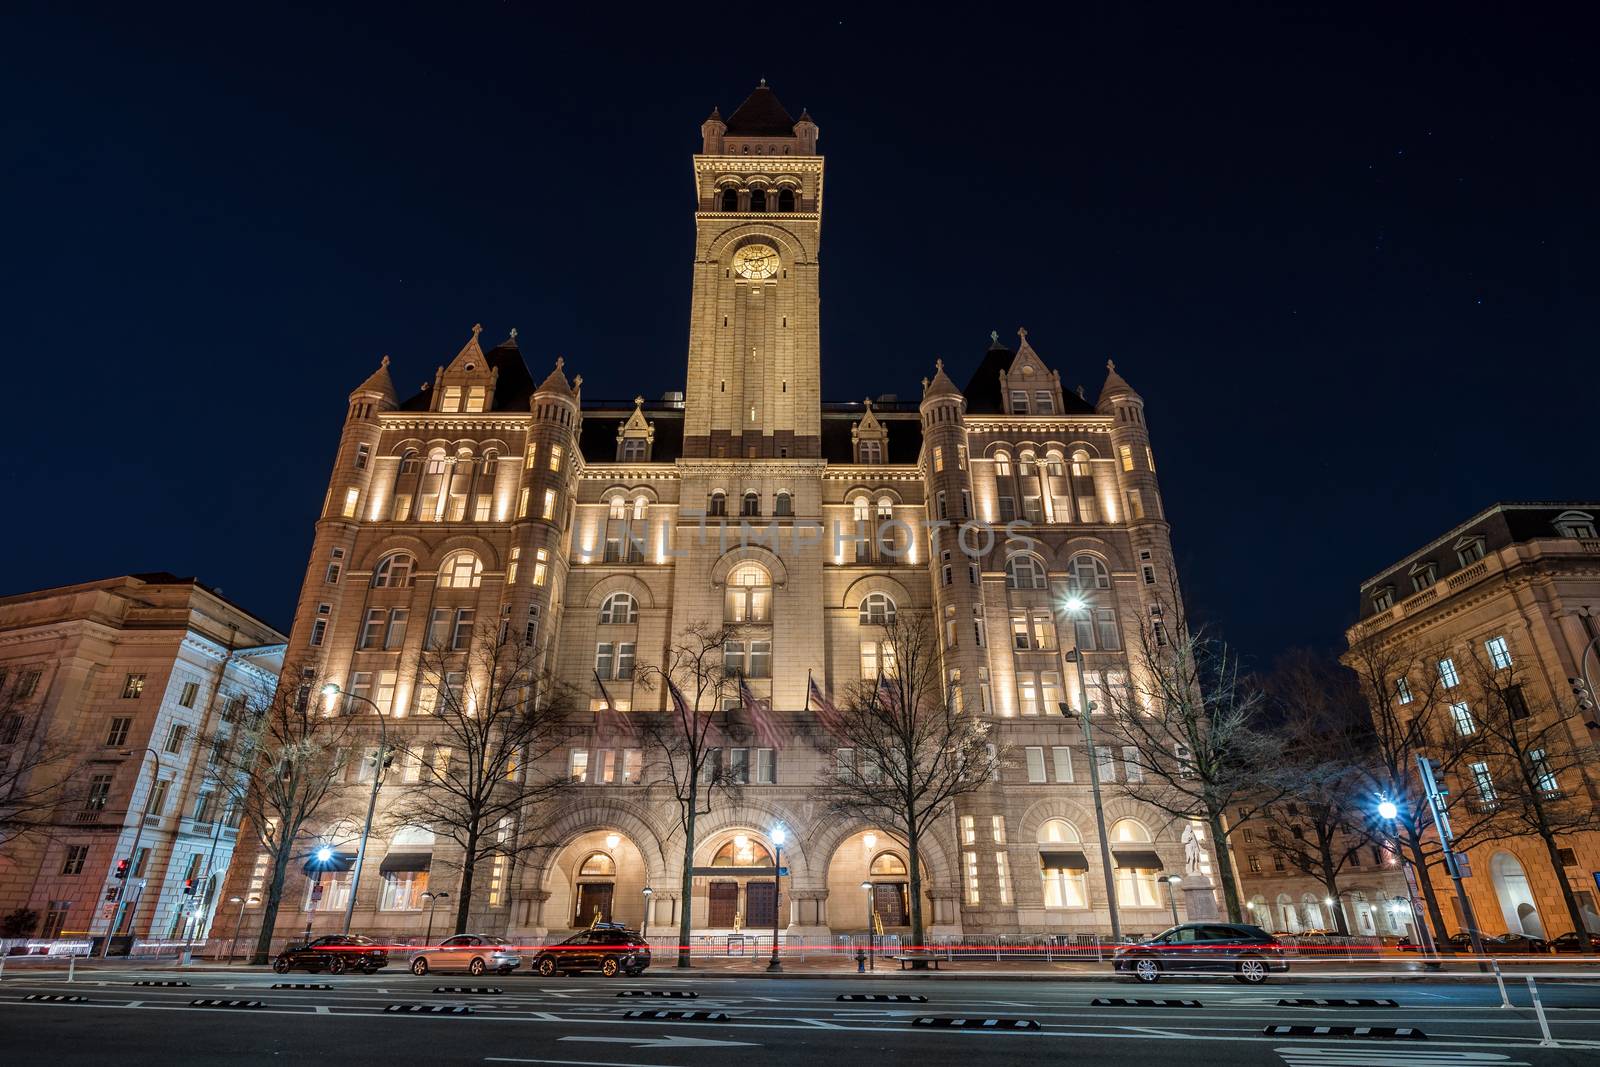 Old post office washington DC, United States, USA downtown, Architecture and Landmark with transportation concept